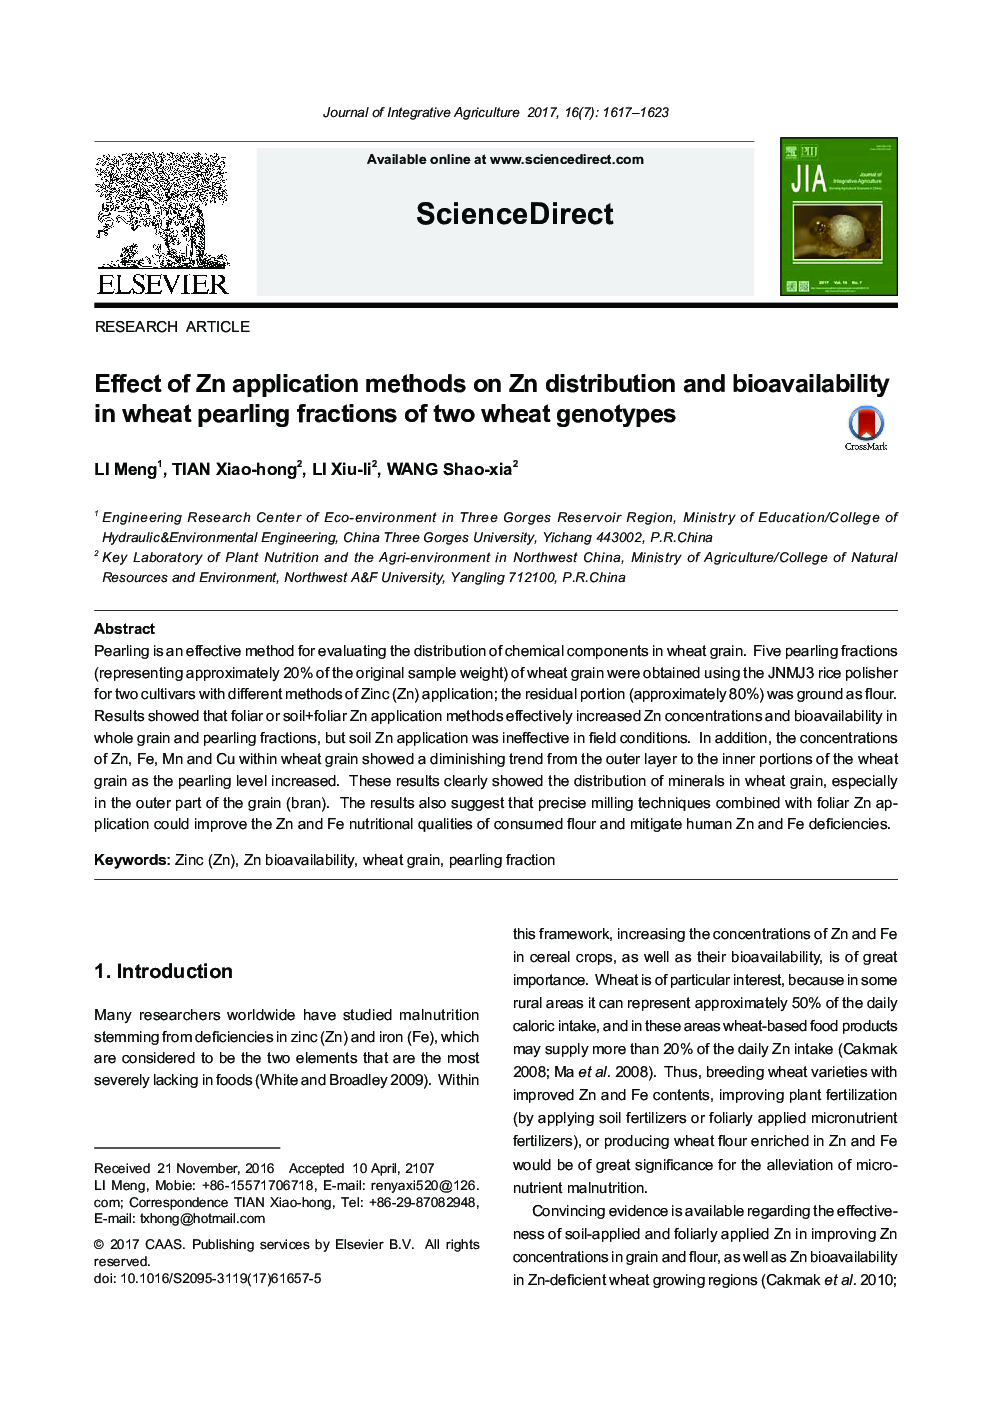 Effect of Zn application methods on Zn distribution and bioavailability in wheat pearling fractions of two wheat genotypes